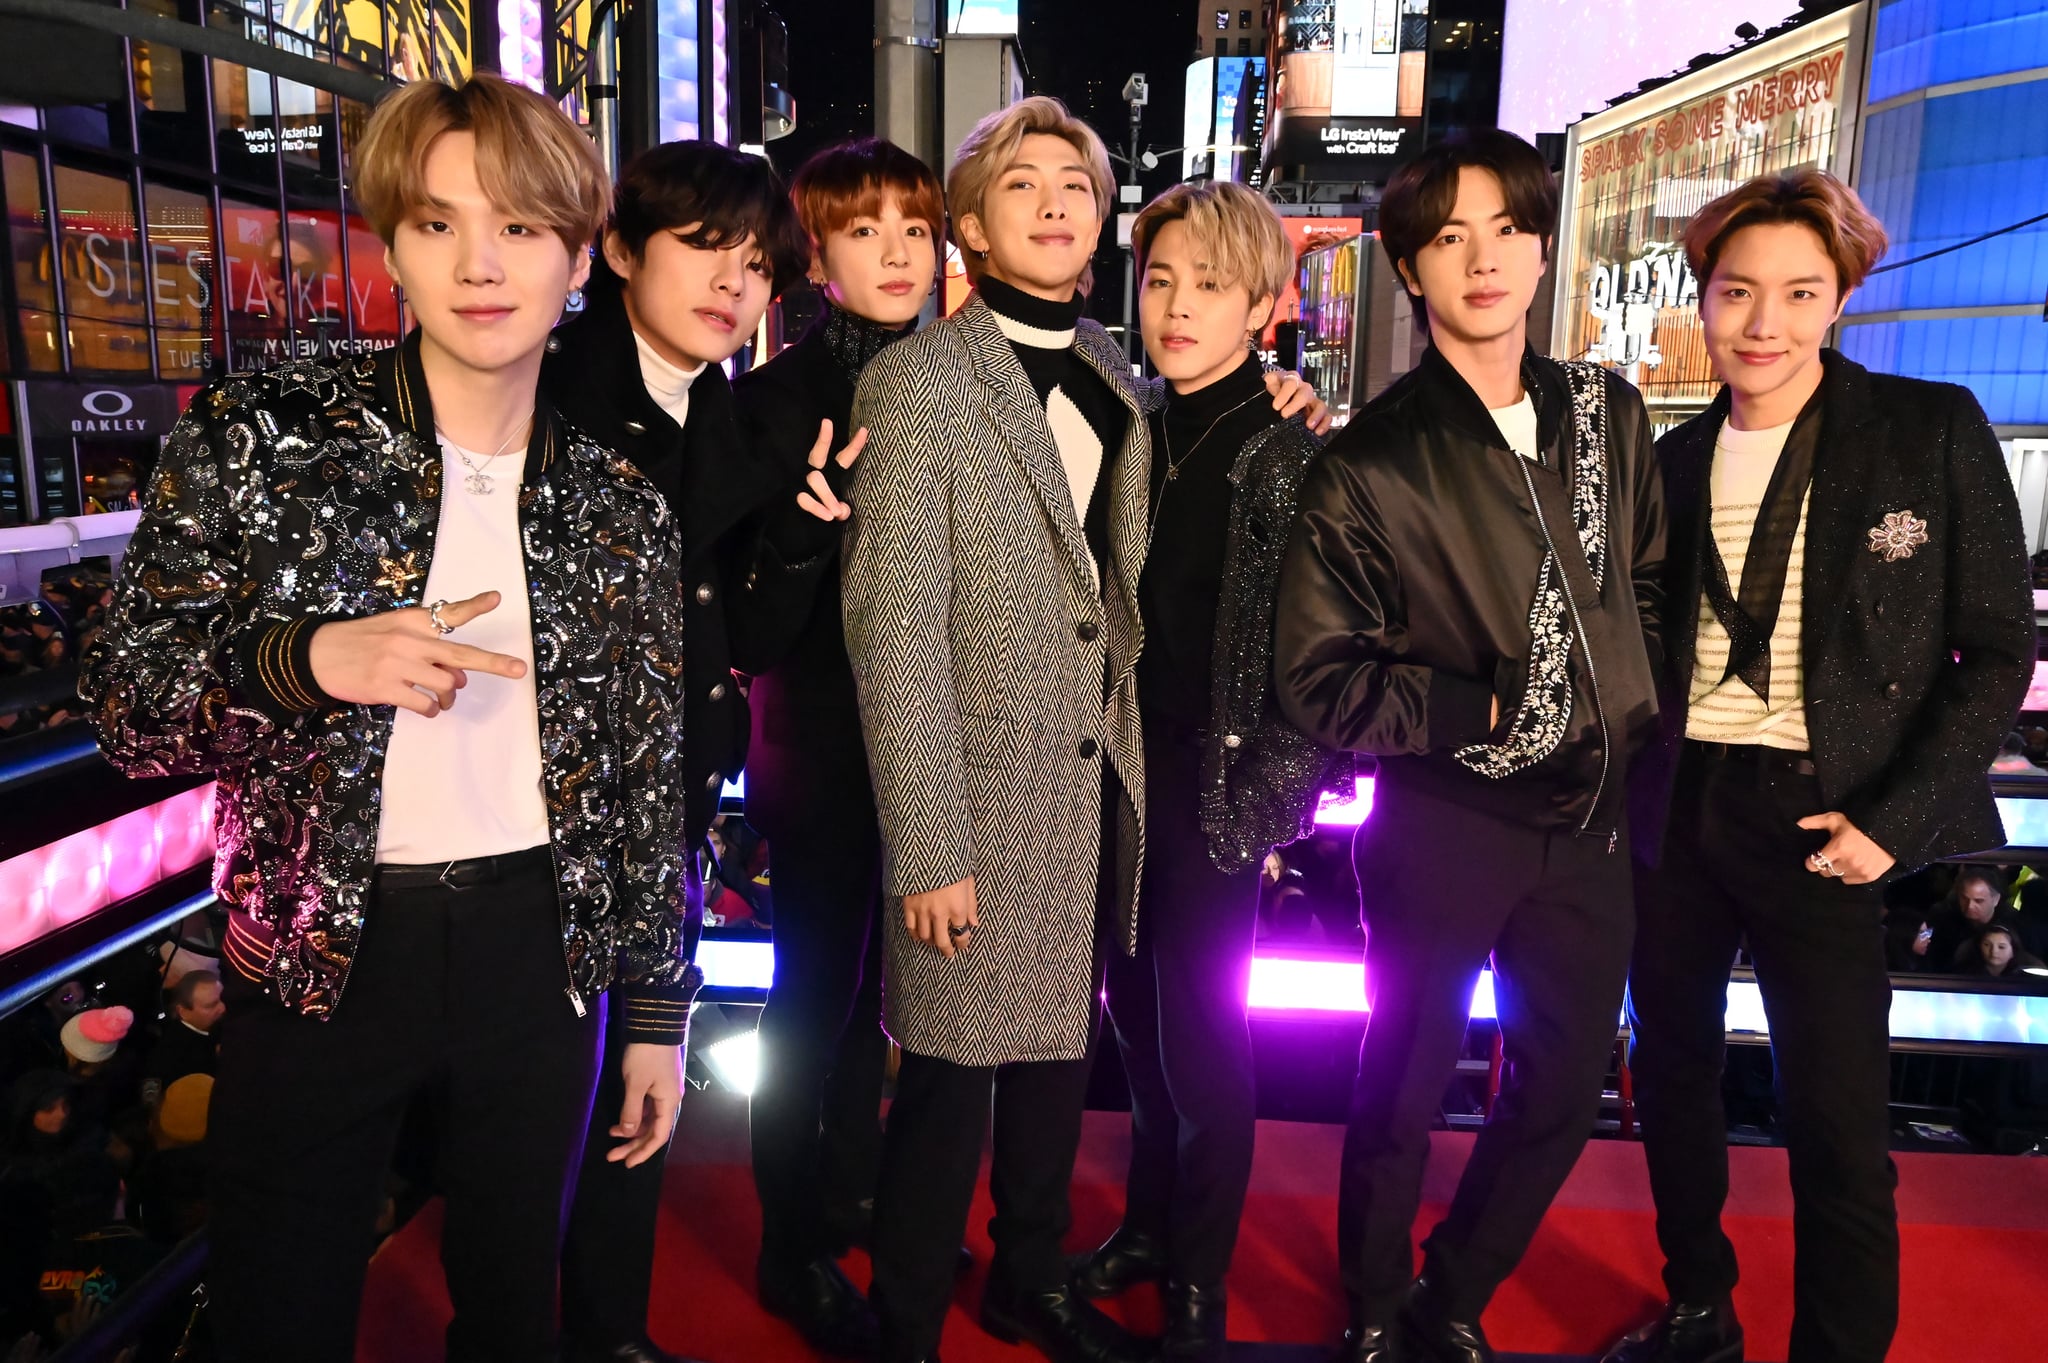 NEW YORK, NEW YORK - DECEMBER 31: BTS attend Dick Clark's New Year's Rockin' Eve With Ryan Seacrest 2020 on December 31, 2019 in New York City. (Photo by Astrid Stawiarz/Getty Images for Dick Clark Productions )